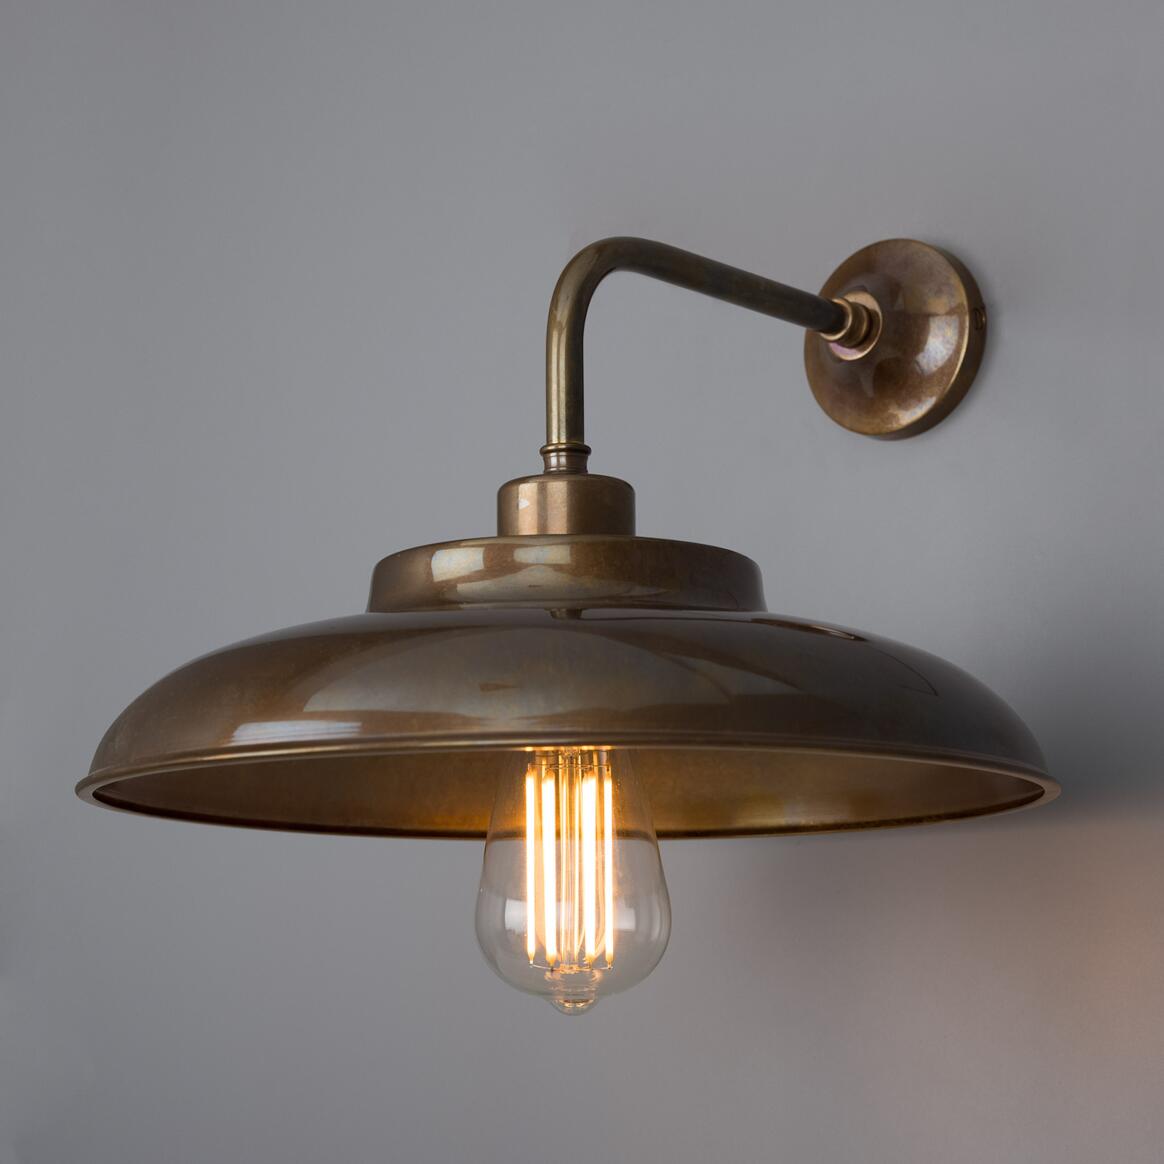 Telal Industrial Brass Factory Wall Light 32cm main product image